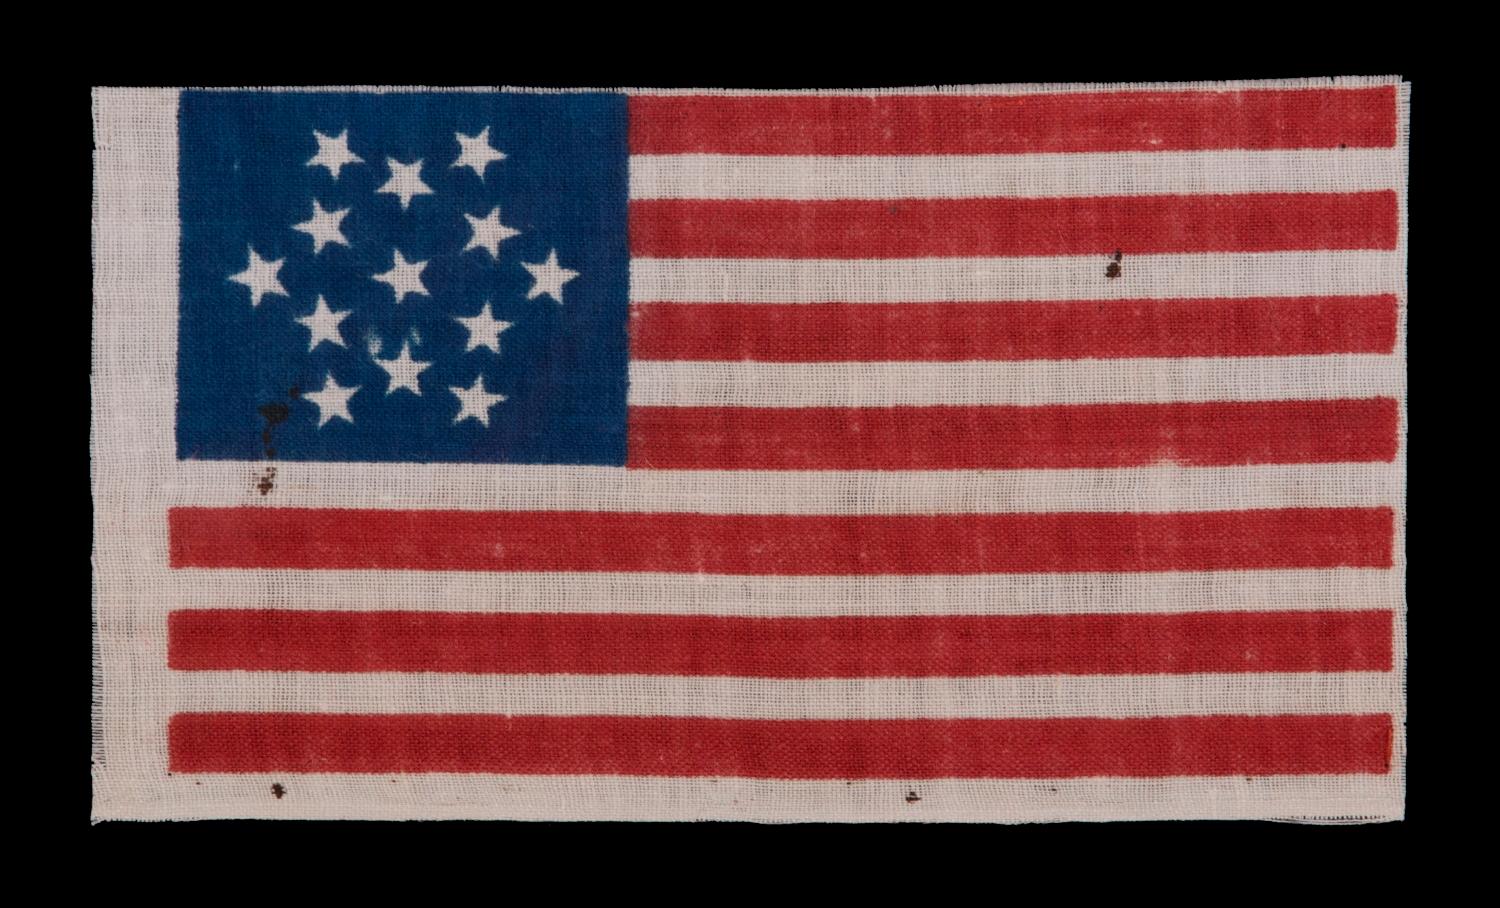 13 STARS IN A SIX-POINTED GREAT STAR/ STAR OF DAVID PATTERN, MADE FOR THE 1876 CENTENNIAL OF AMERICAN INDEPENDENCE

13 star American national parade flag, printed cotton. The stars are arranged in a six-pointed version of what is known as the